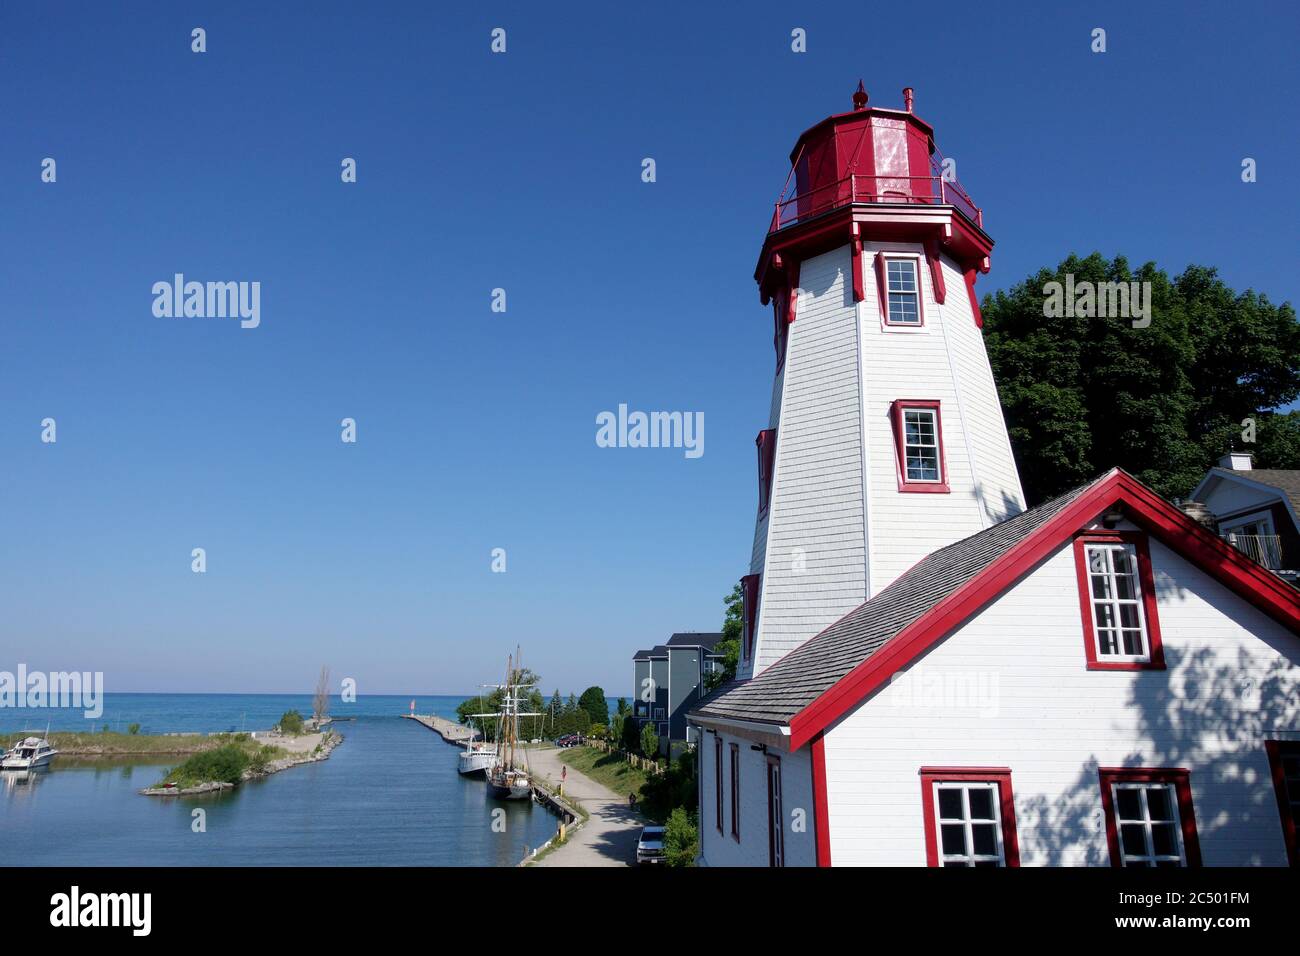 The Historic Lighthouse At Kincardine Harbour Ontario Canada On Lake Huron One Of The Great Lakes Stock Photo